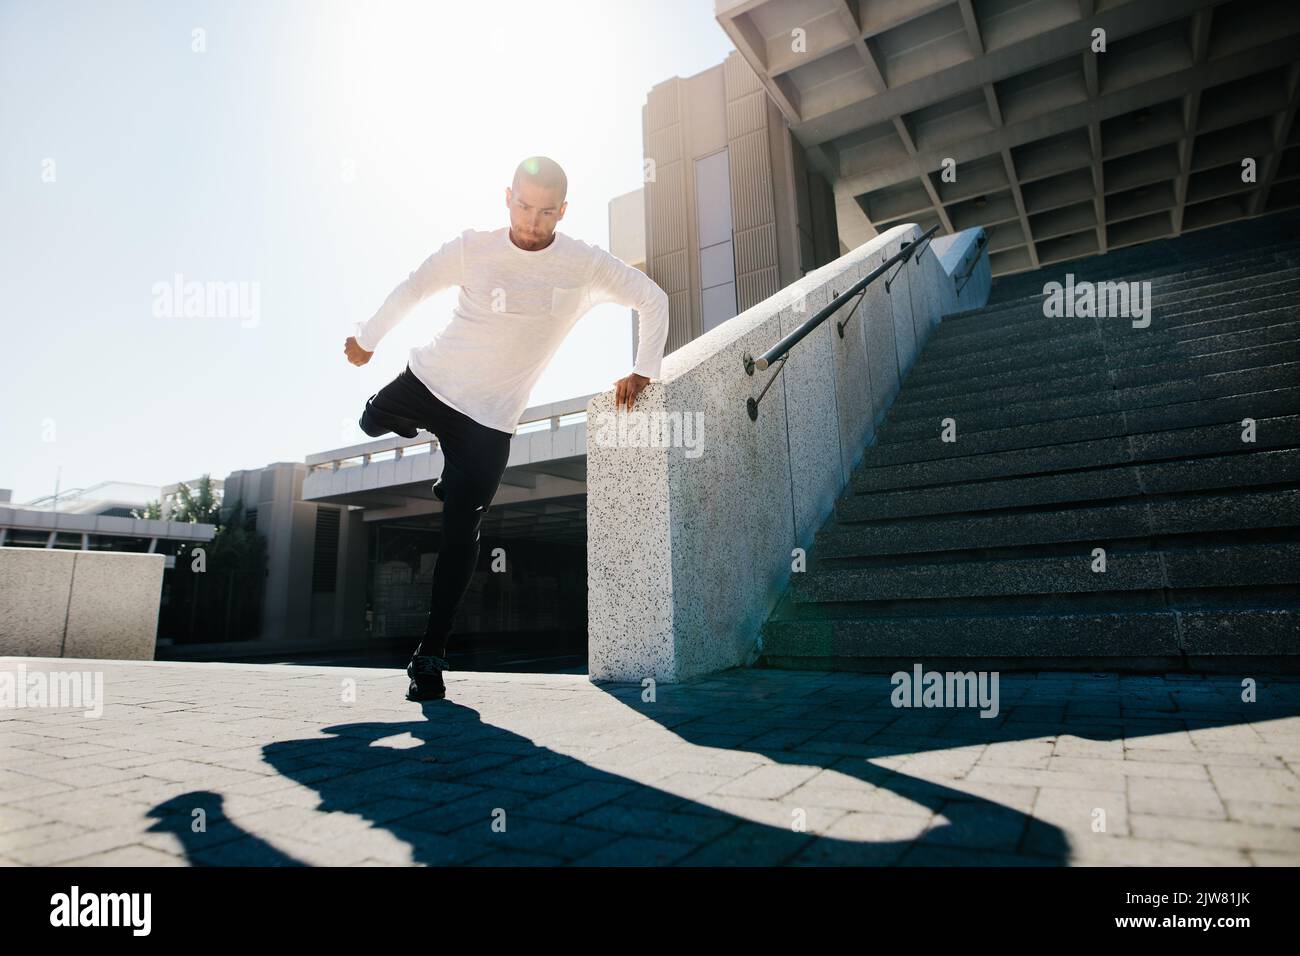 Fit urban guy performing a wall spin outdoors in city. Young sportsman practicing parkour and free running. Stock Photo